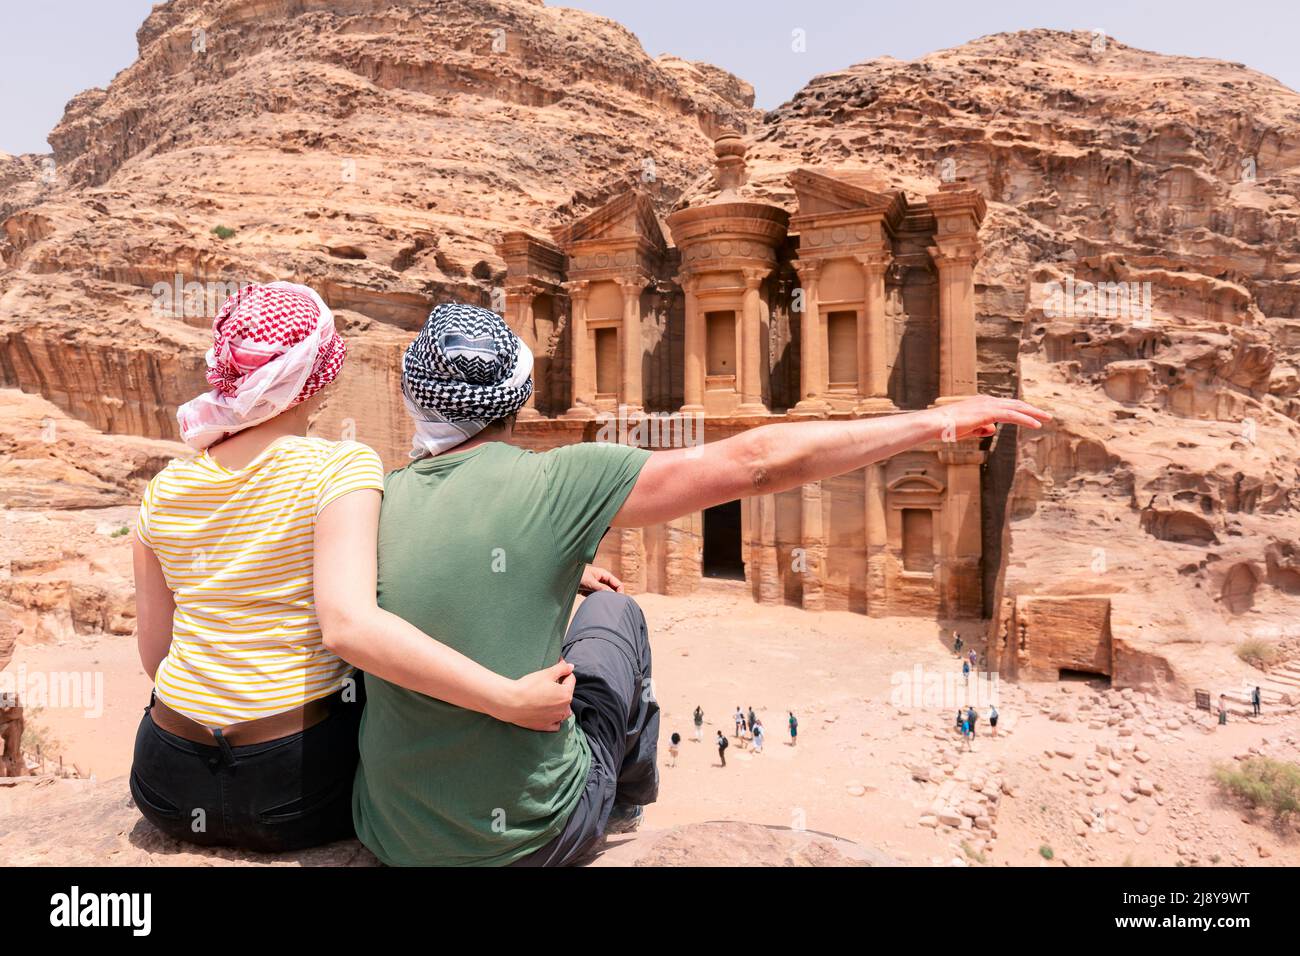 A young couple is watching the monastery of petra - Jordan - travel Stock Photo